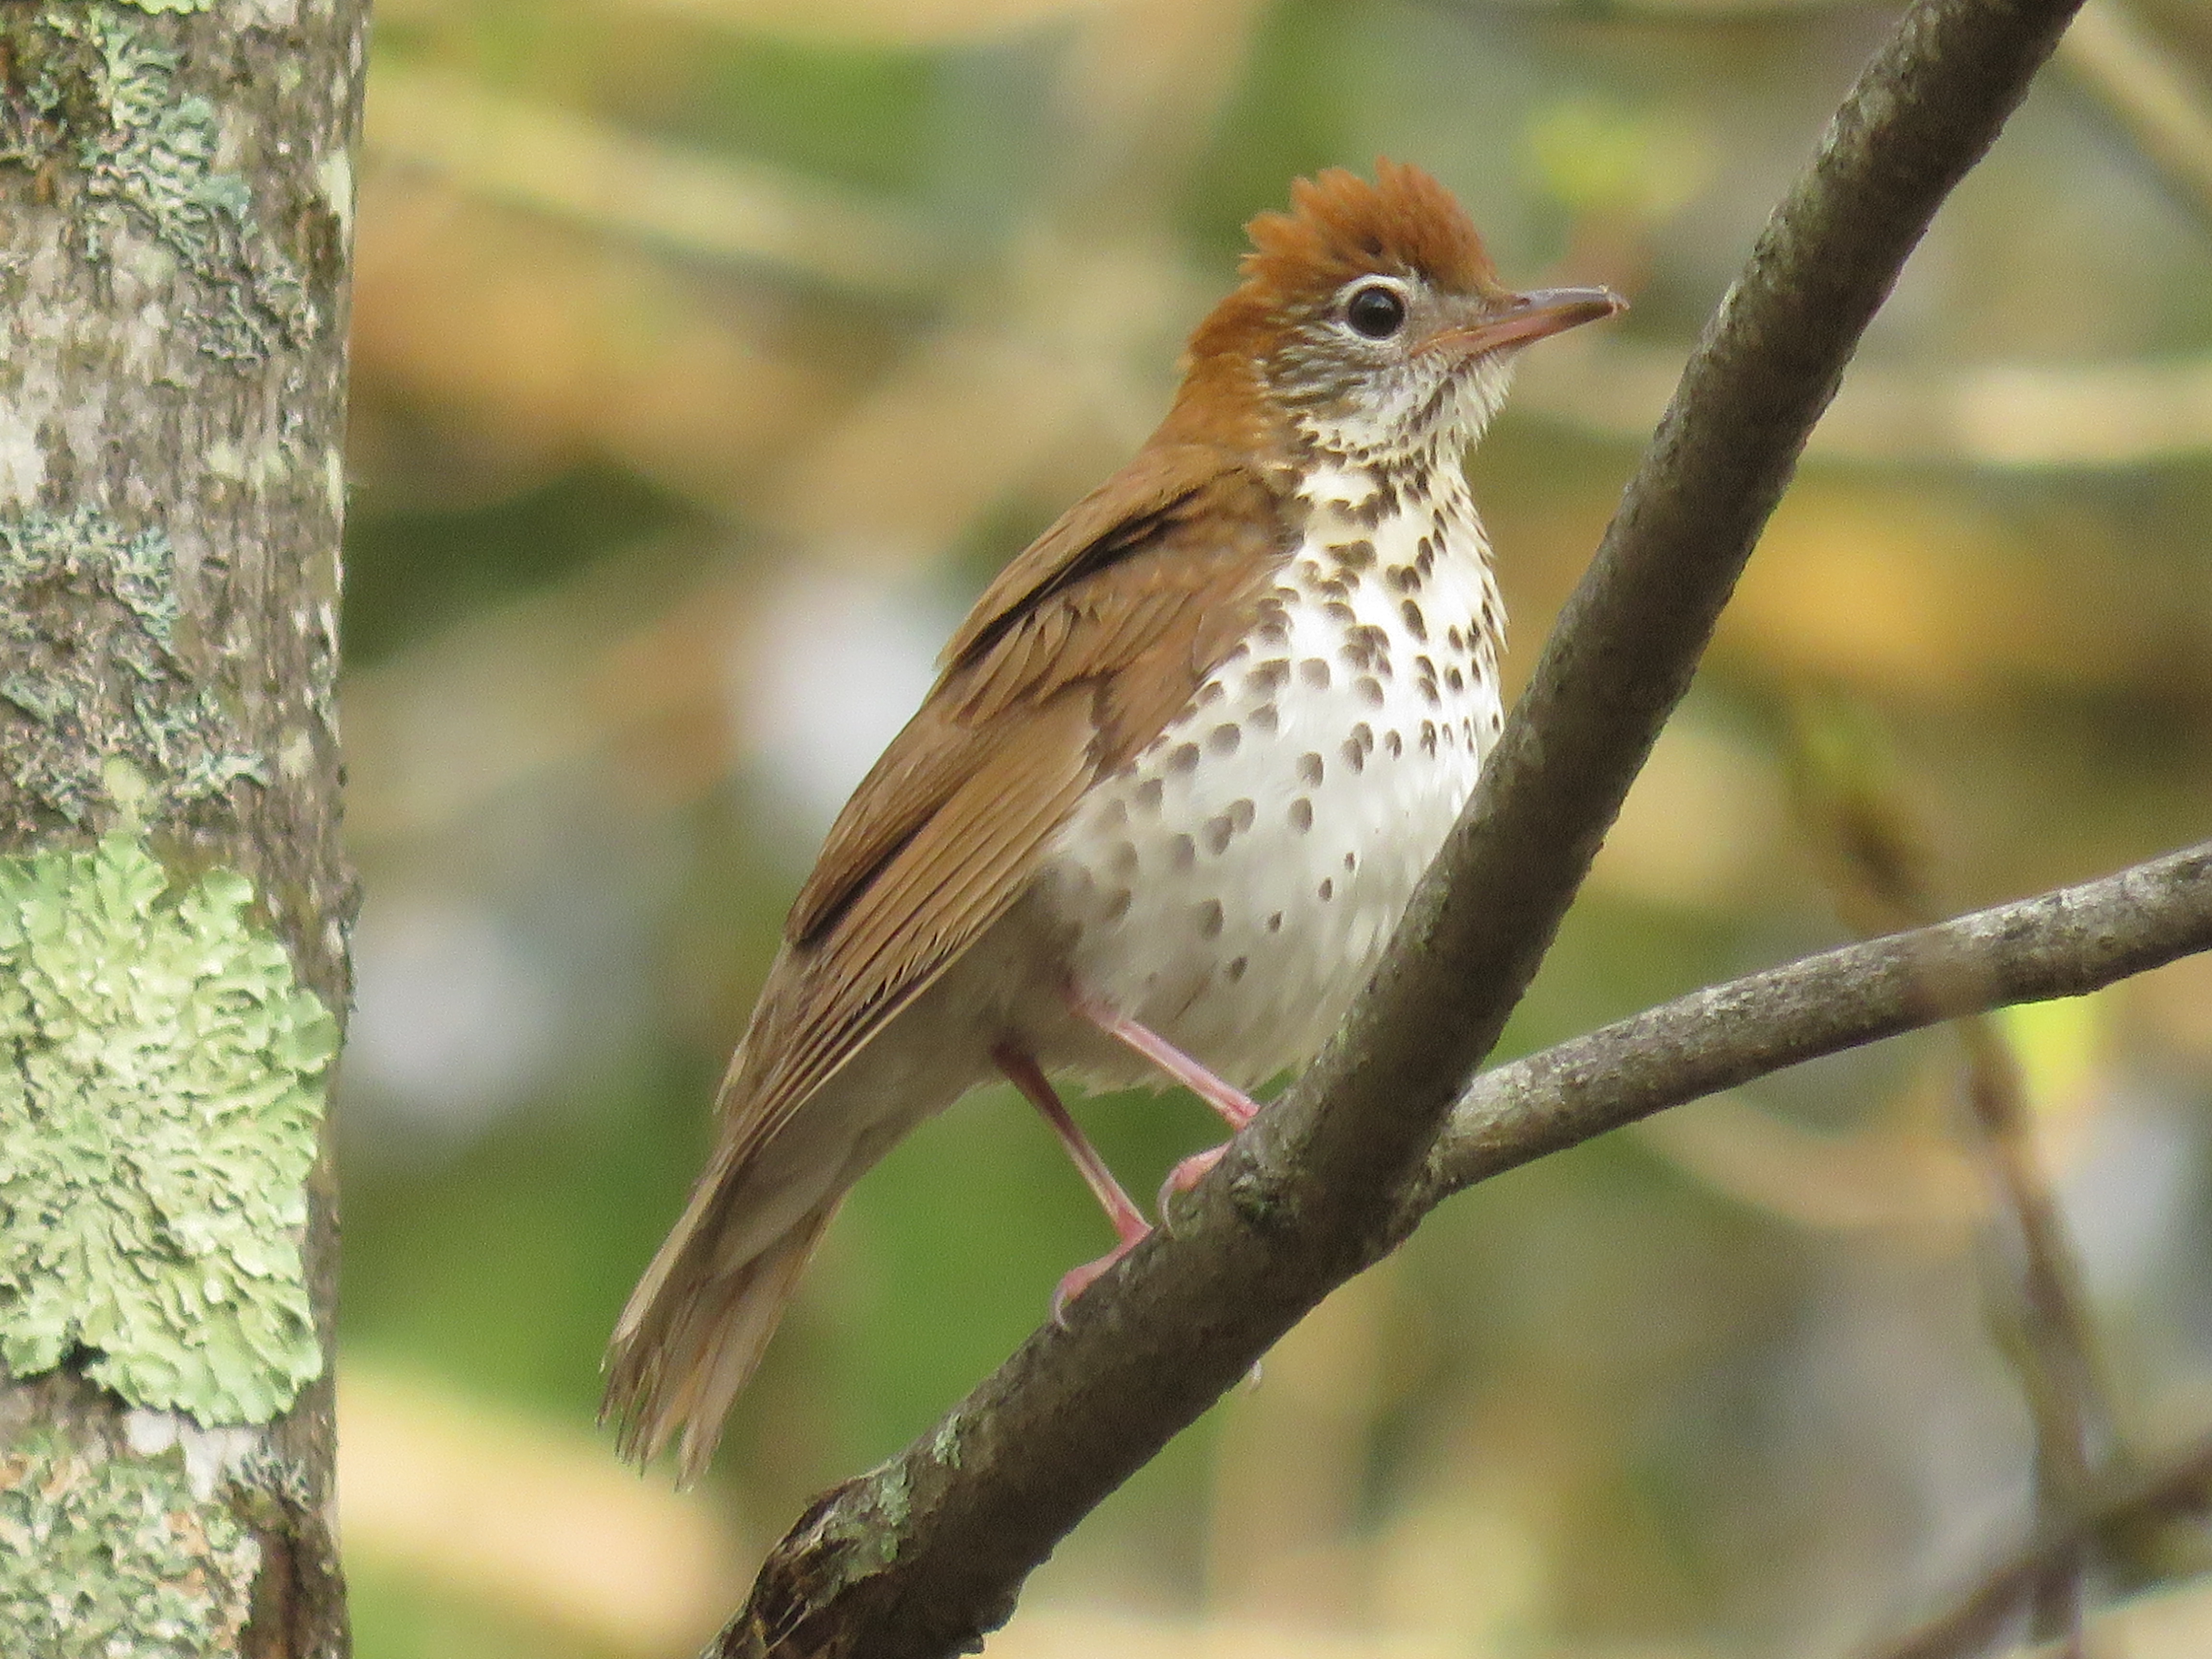 A brown bird with a white spotted chest on a branch.